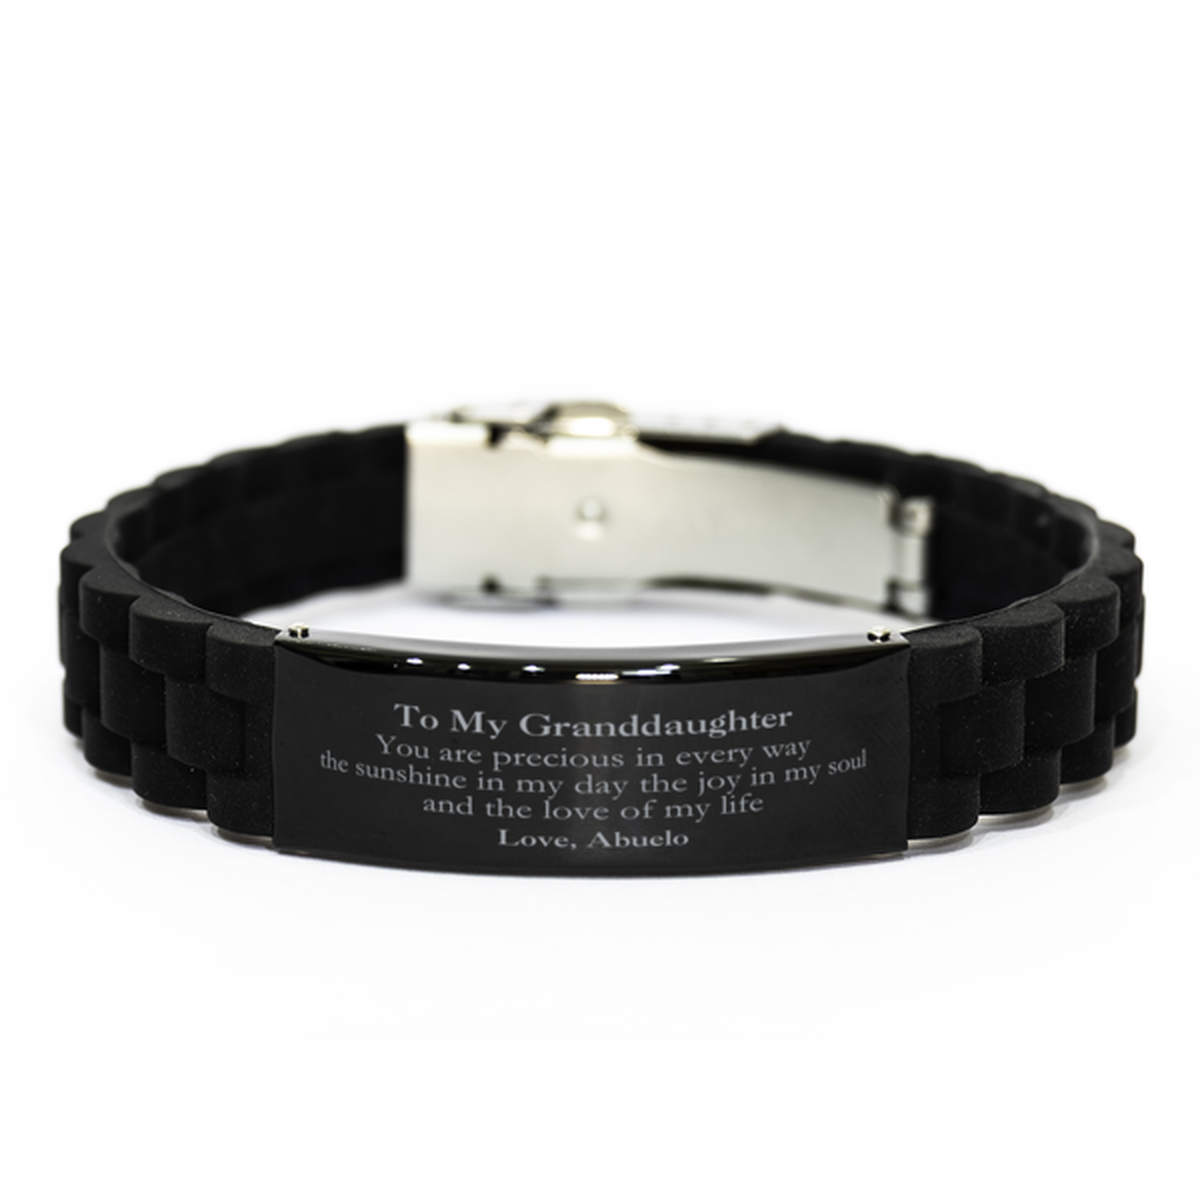 Graduation Gifts for Granddaughter Black Glidelock Clasp Bracelet Present from Abuelo, Christmas Granddaughter Birthday Gifts Granddaughter You are precious in every way the sunshine in my day. Love, Abuelo